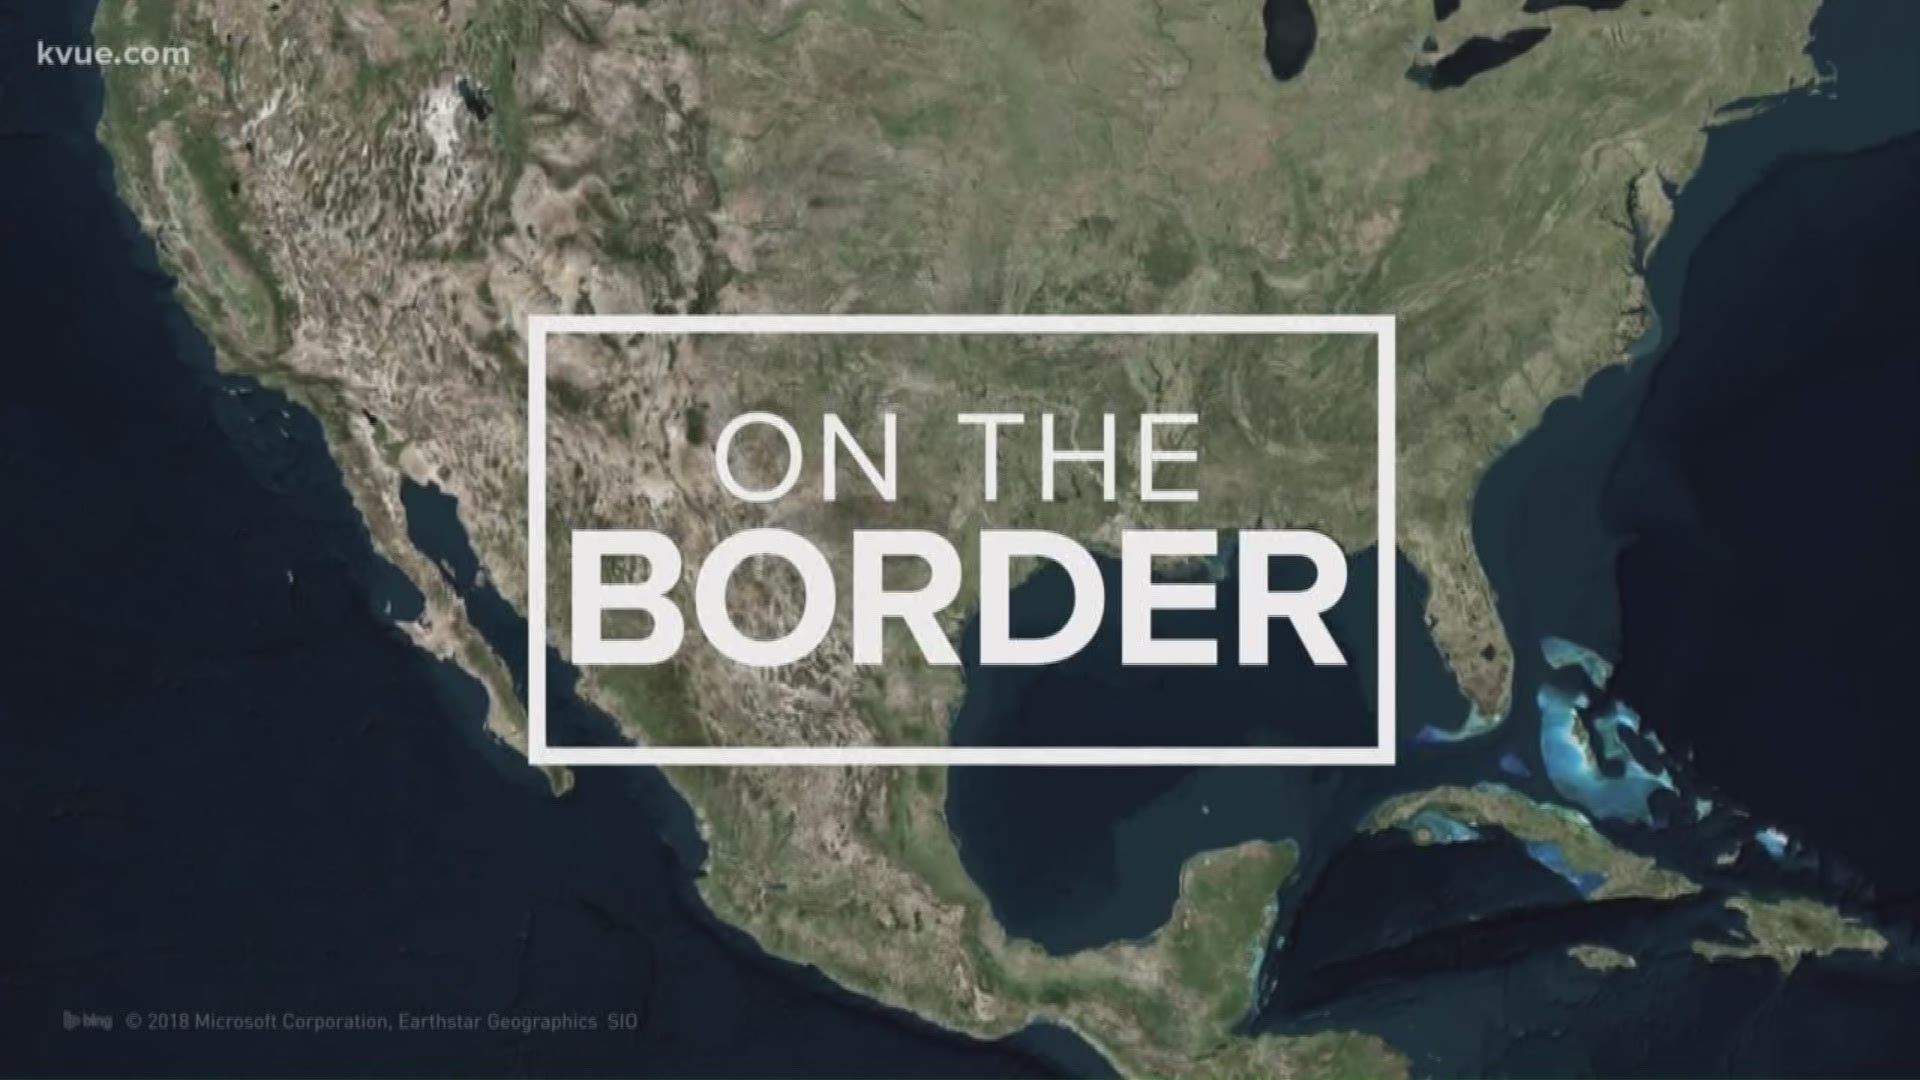 Texas is getting millions of dollars to better secure the southern border.